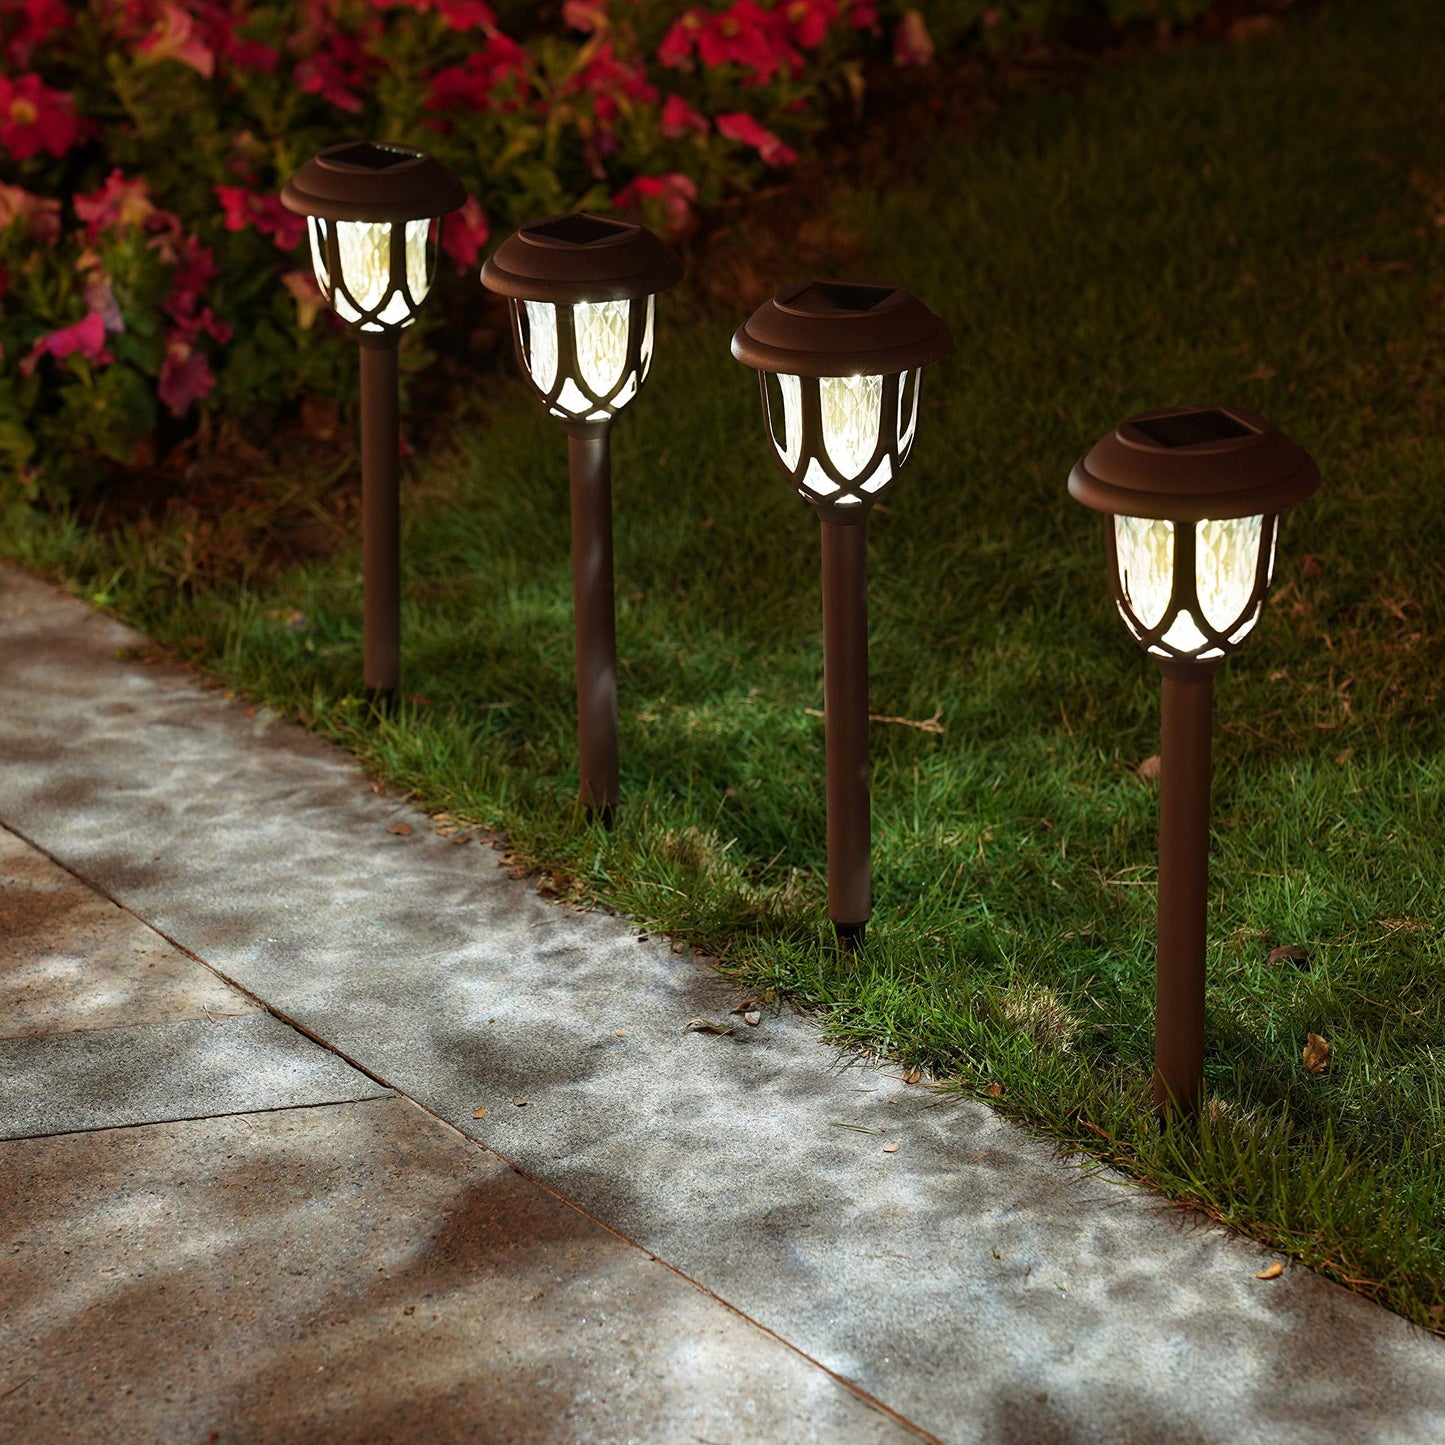 10 Pack Solar Lights Outdoor Decorative, Solar Pathway Lights Outdoor, Solar Powered Garden Yard Lights for Walkway Sidewalk Driveway. (Brown, Cool White)